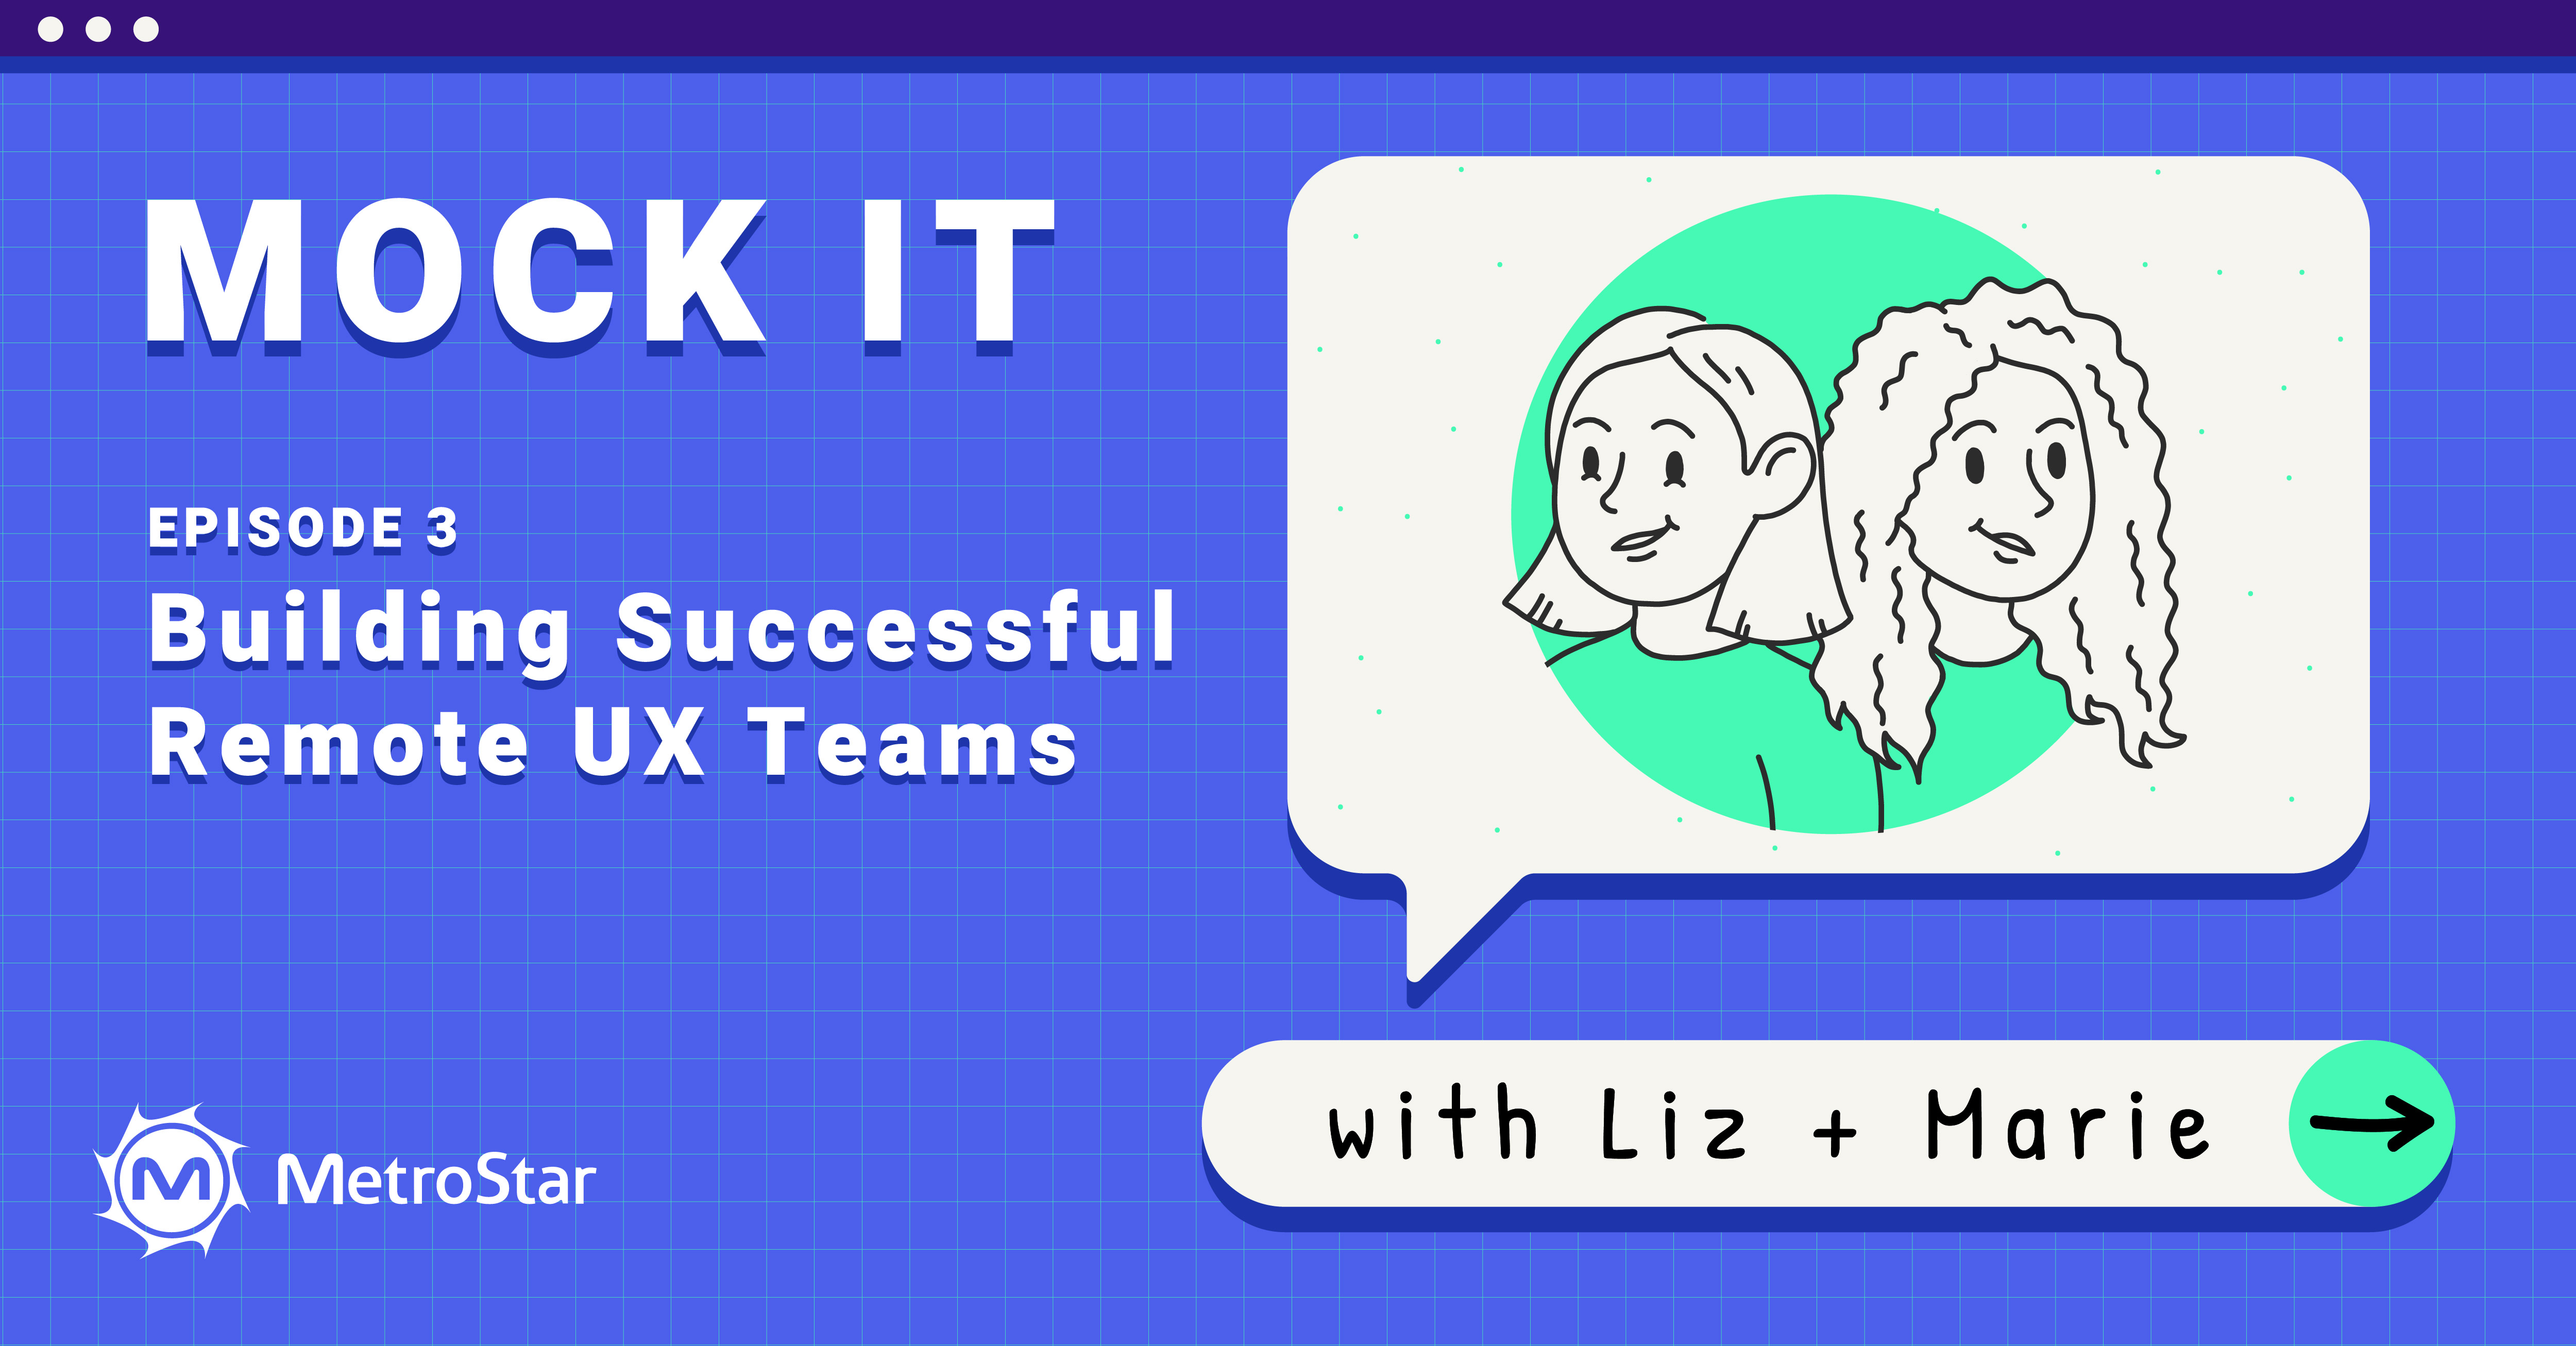 Building Successful Remote UX Teams text on graphic with Mock IT podcast logo 